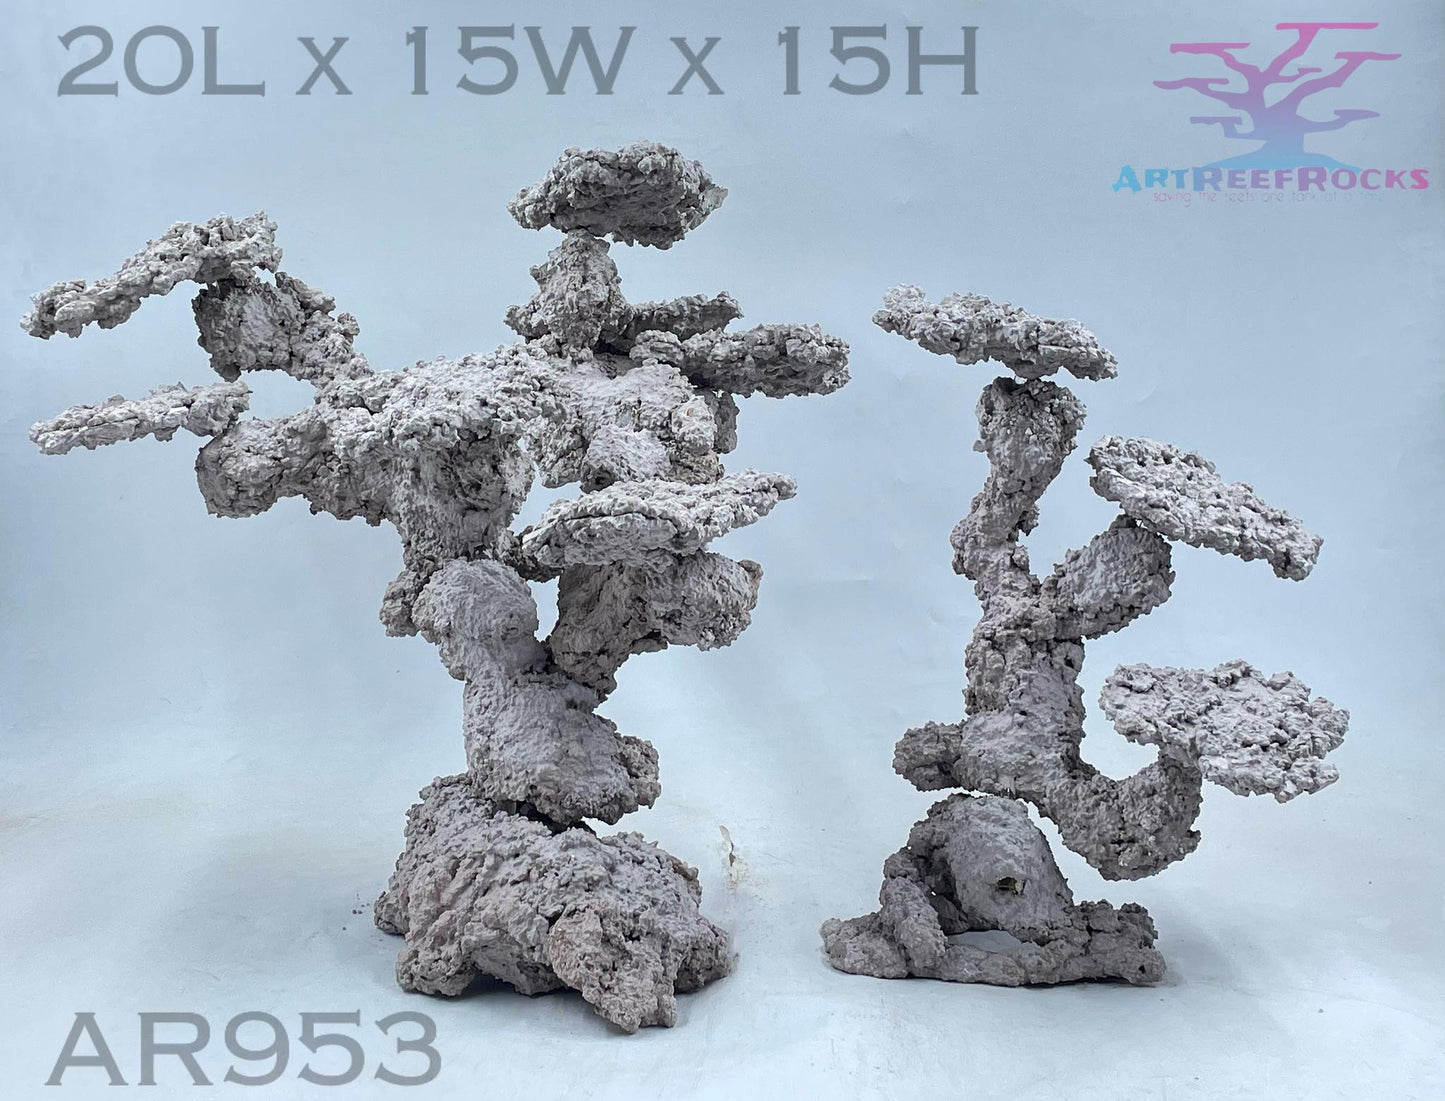 Sold Large Art Reef Rock Structure WYSIWYG